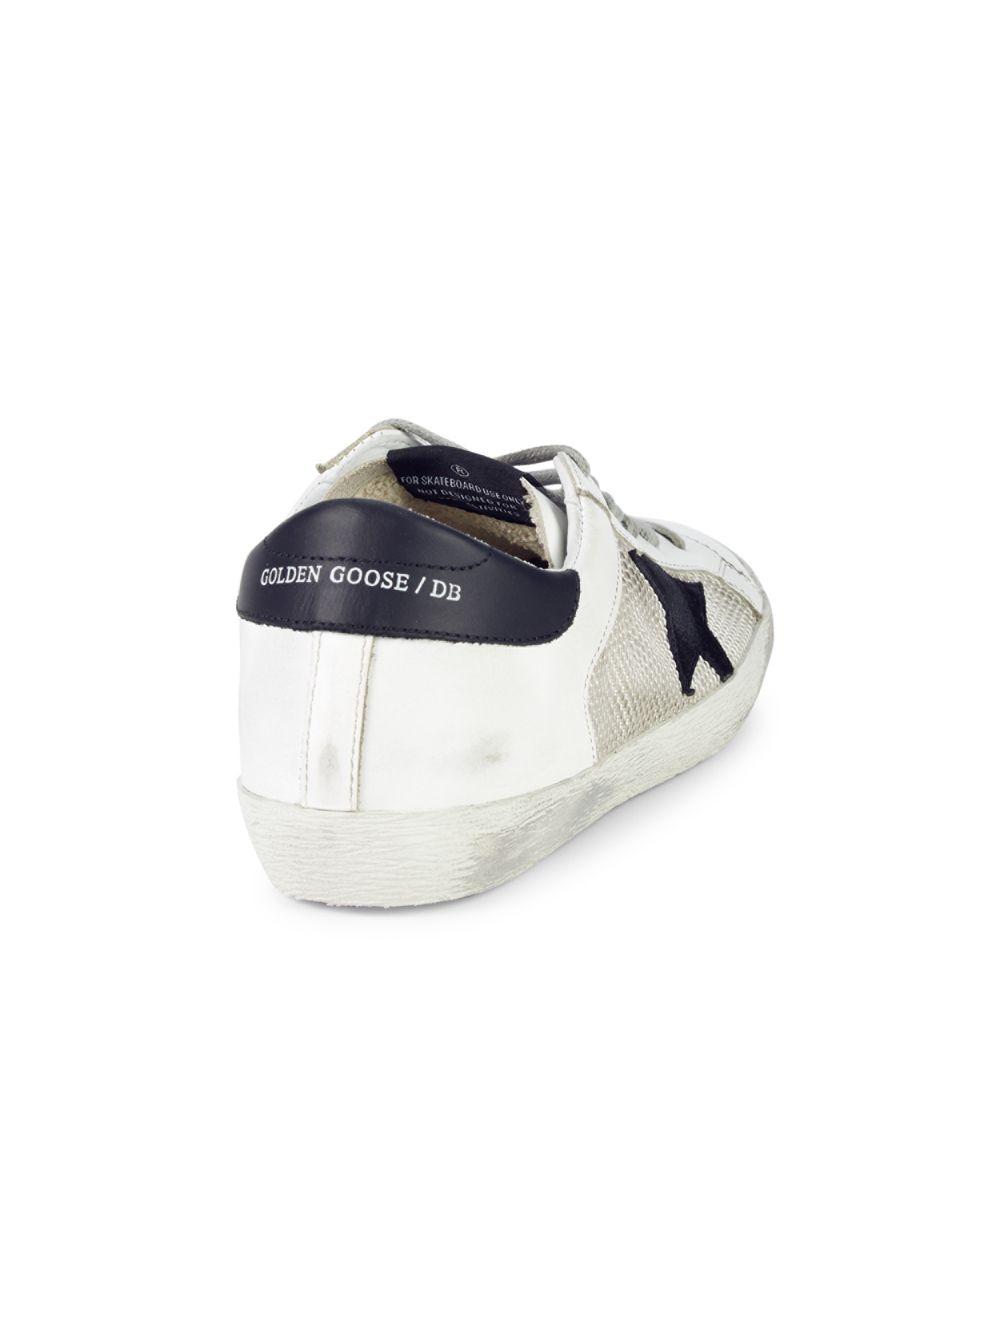 Golden Goose Leather Superstar Mixed Media Sneakers in White - Lyst